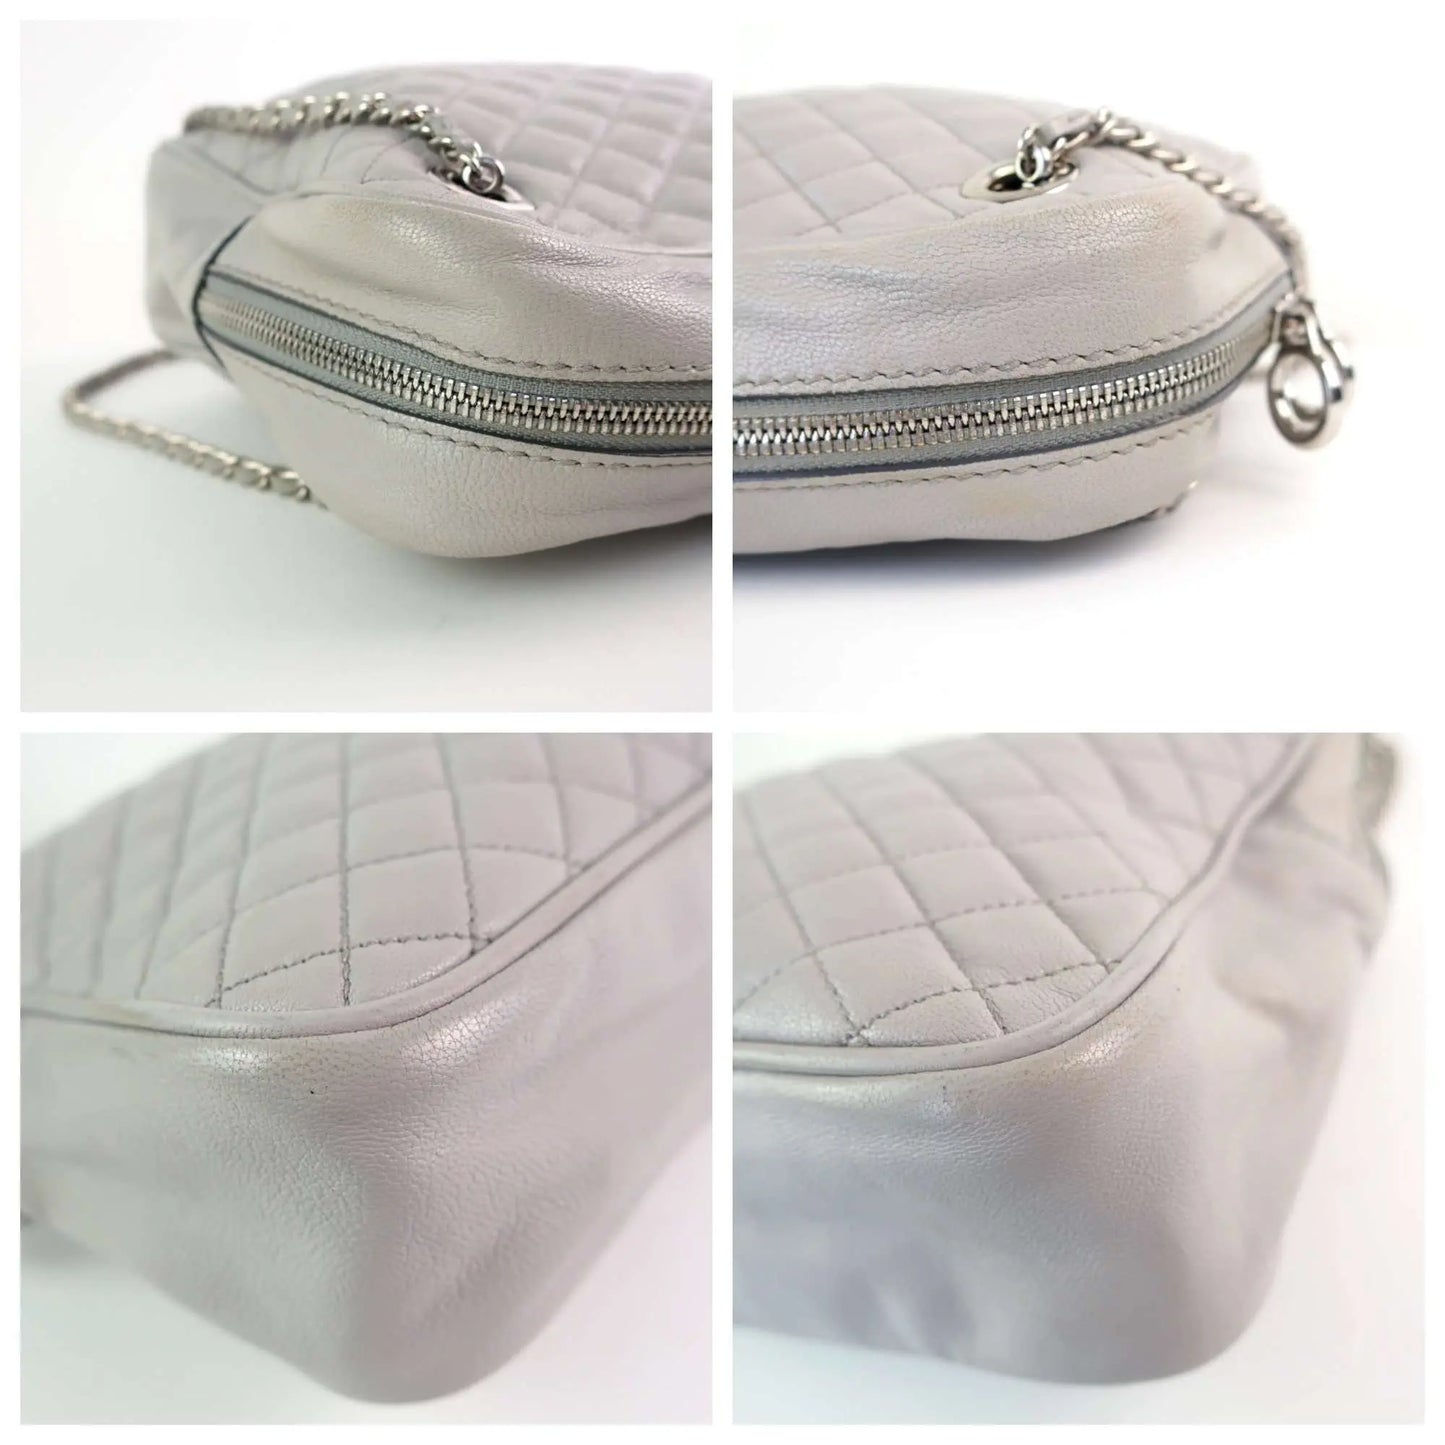 Load image into Gallery viewer, Dolce Gabbana Dolce &amp;amp; Gabbana Light Grey Quilted Lily Glam Leather Bag LVBagaholic
